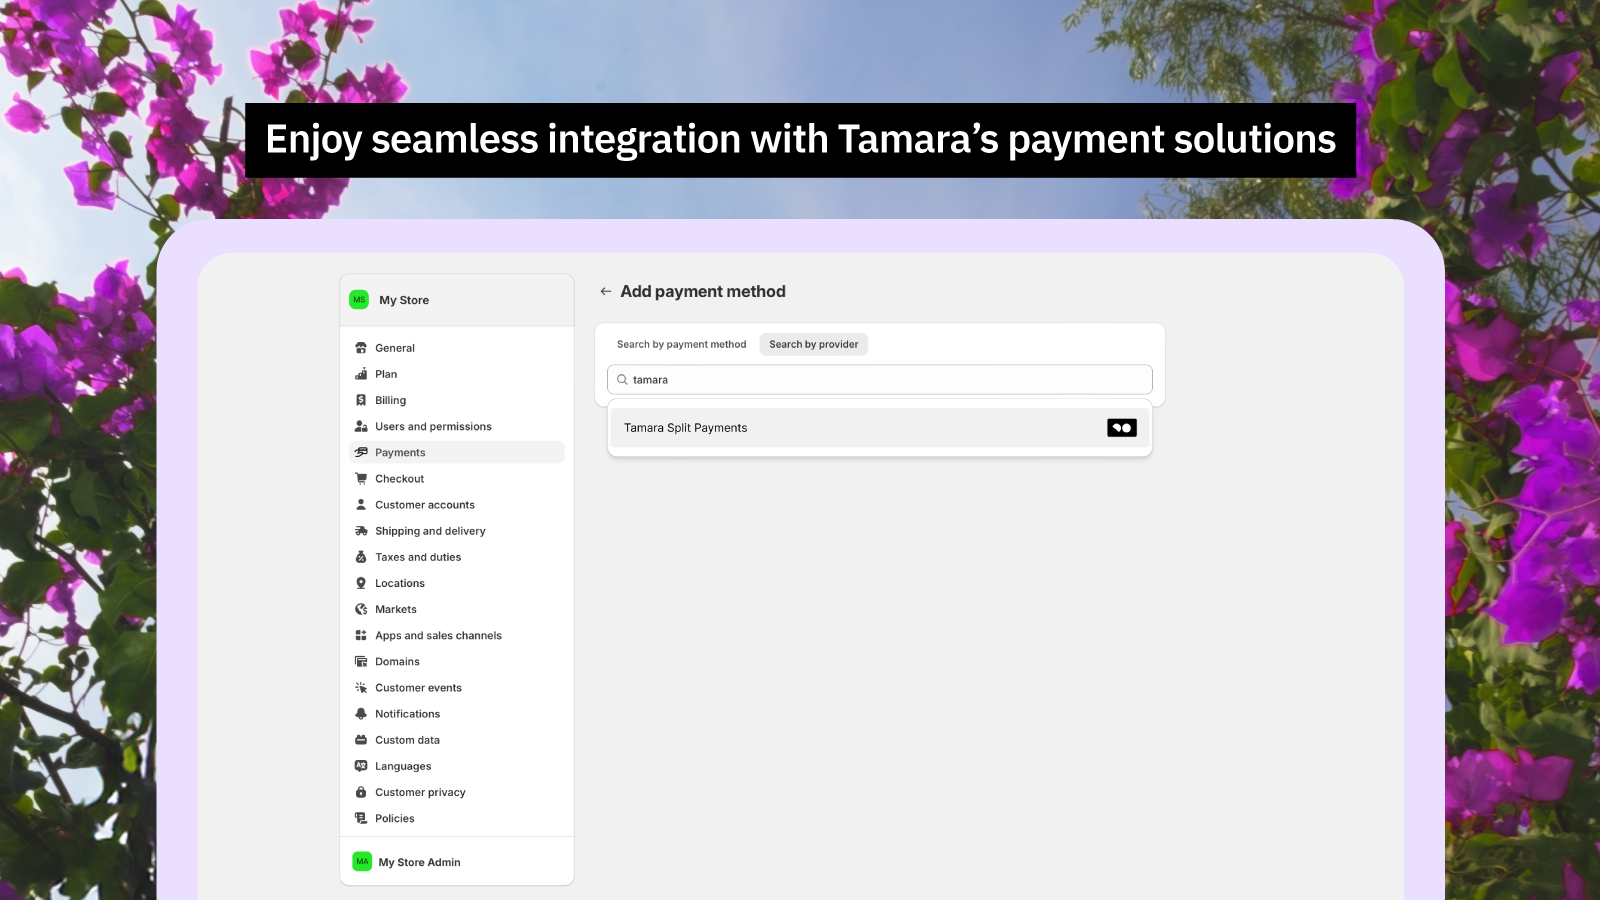 Enjoy seamless integration with Tamara’s payment solutions